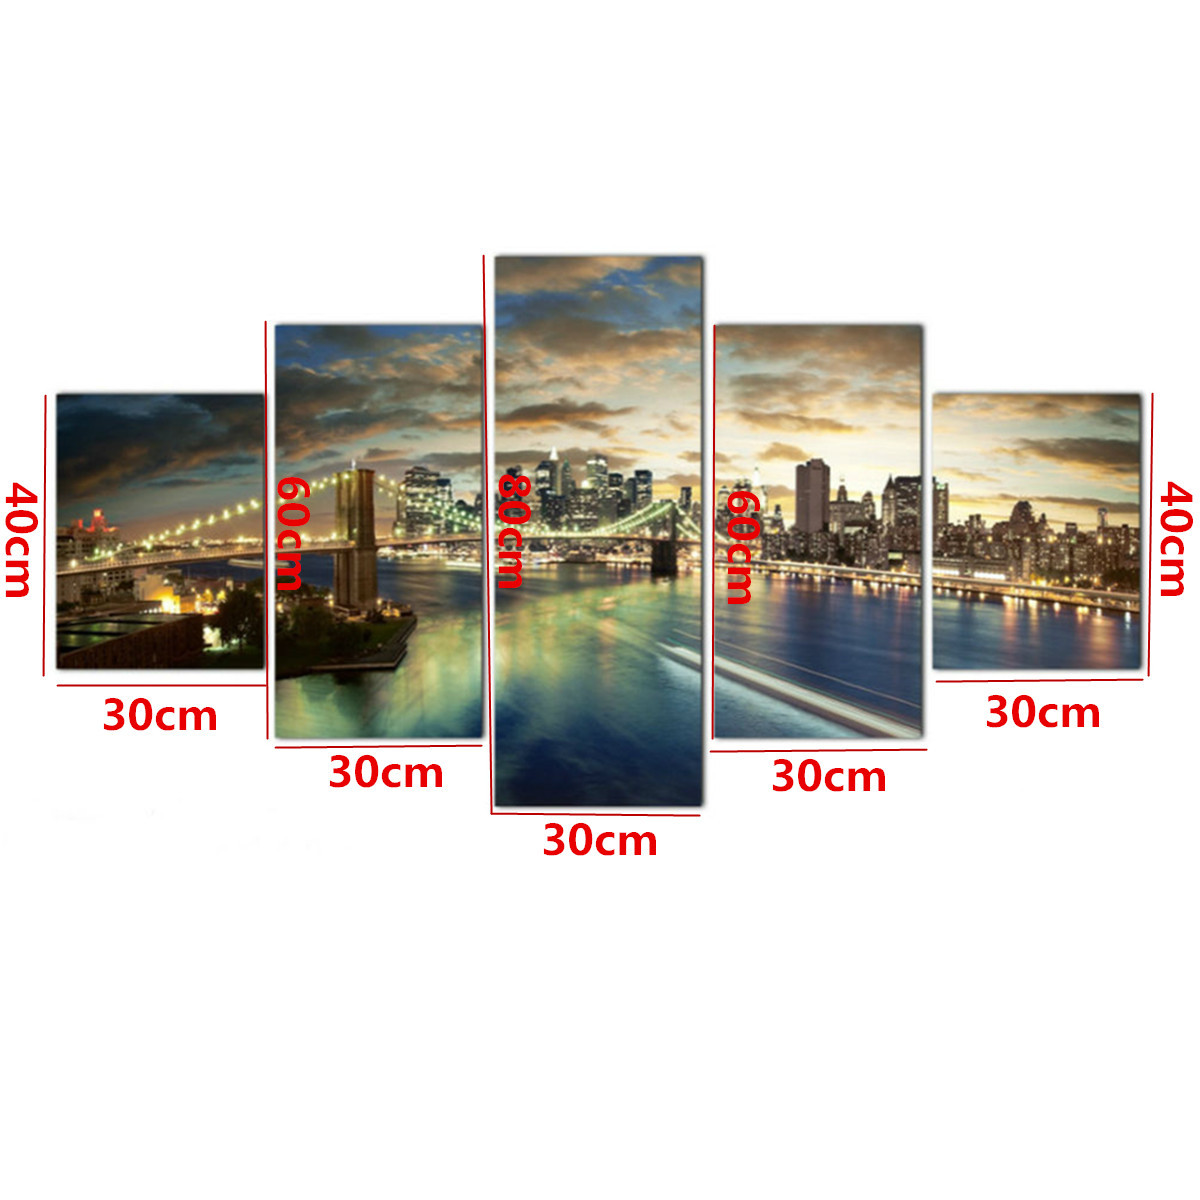 5-Pcs-Wall-Decorative-Painting-New-York-City-at-Night-Wall-Decor-Art-Pictures-Canvas-Prints-Home-Off-1724152-1